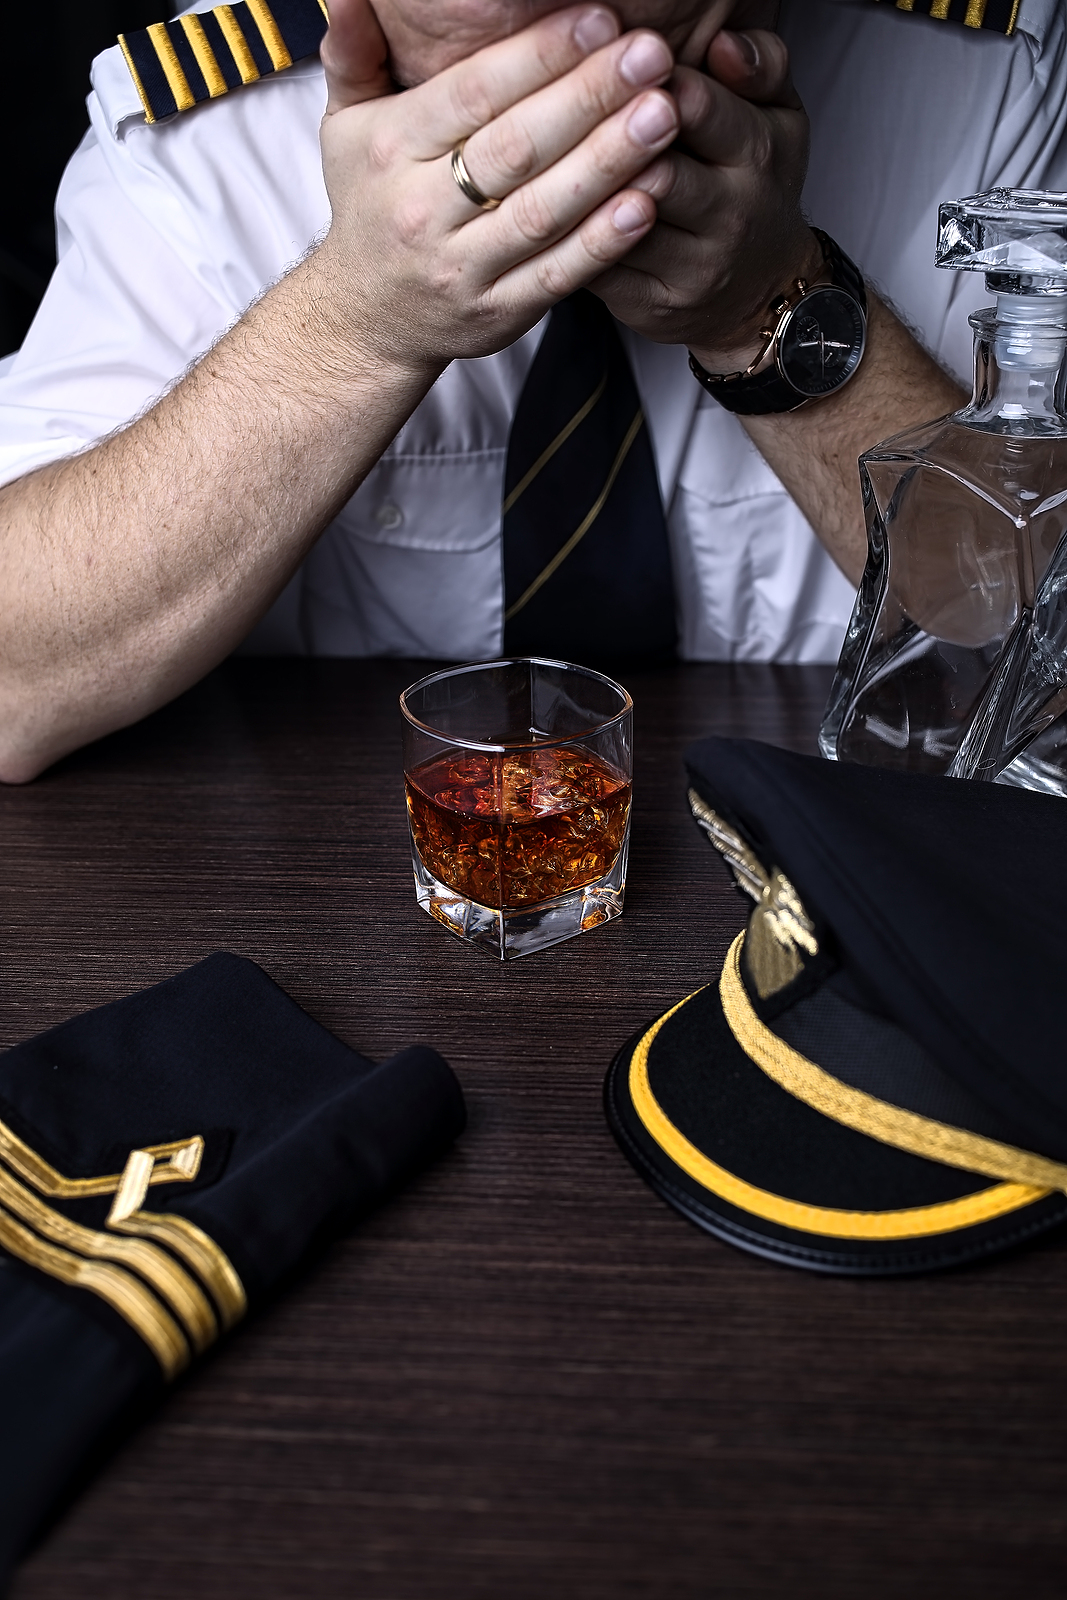 Flying as a Pilot after a DUI